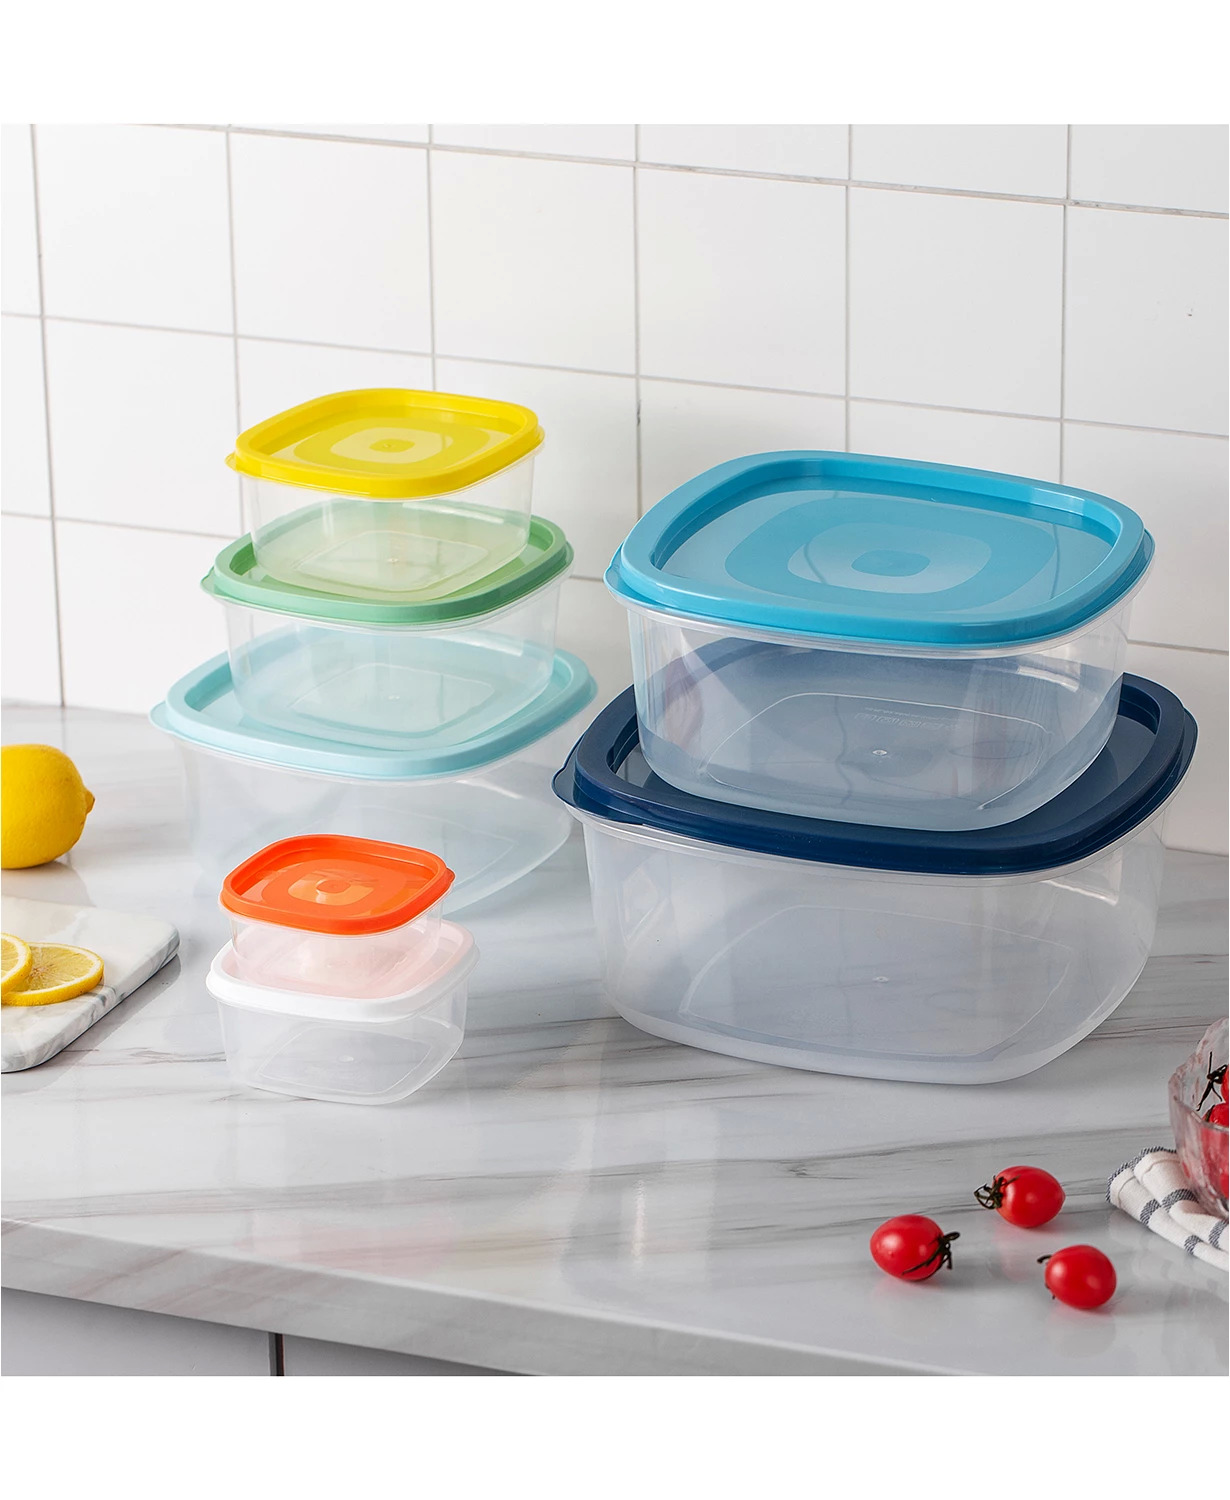 14-Pc Enchante Cook With Color Nesting Food Storage Set $5.93 + SD Cashback + Free Store Pickup at Macy's or FS on $25+